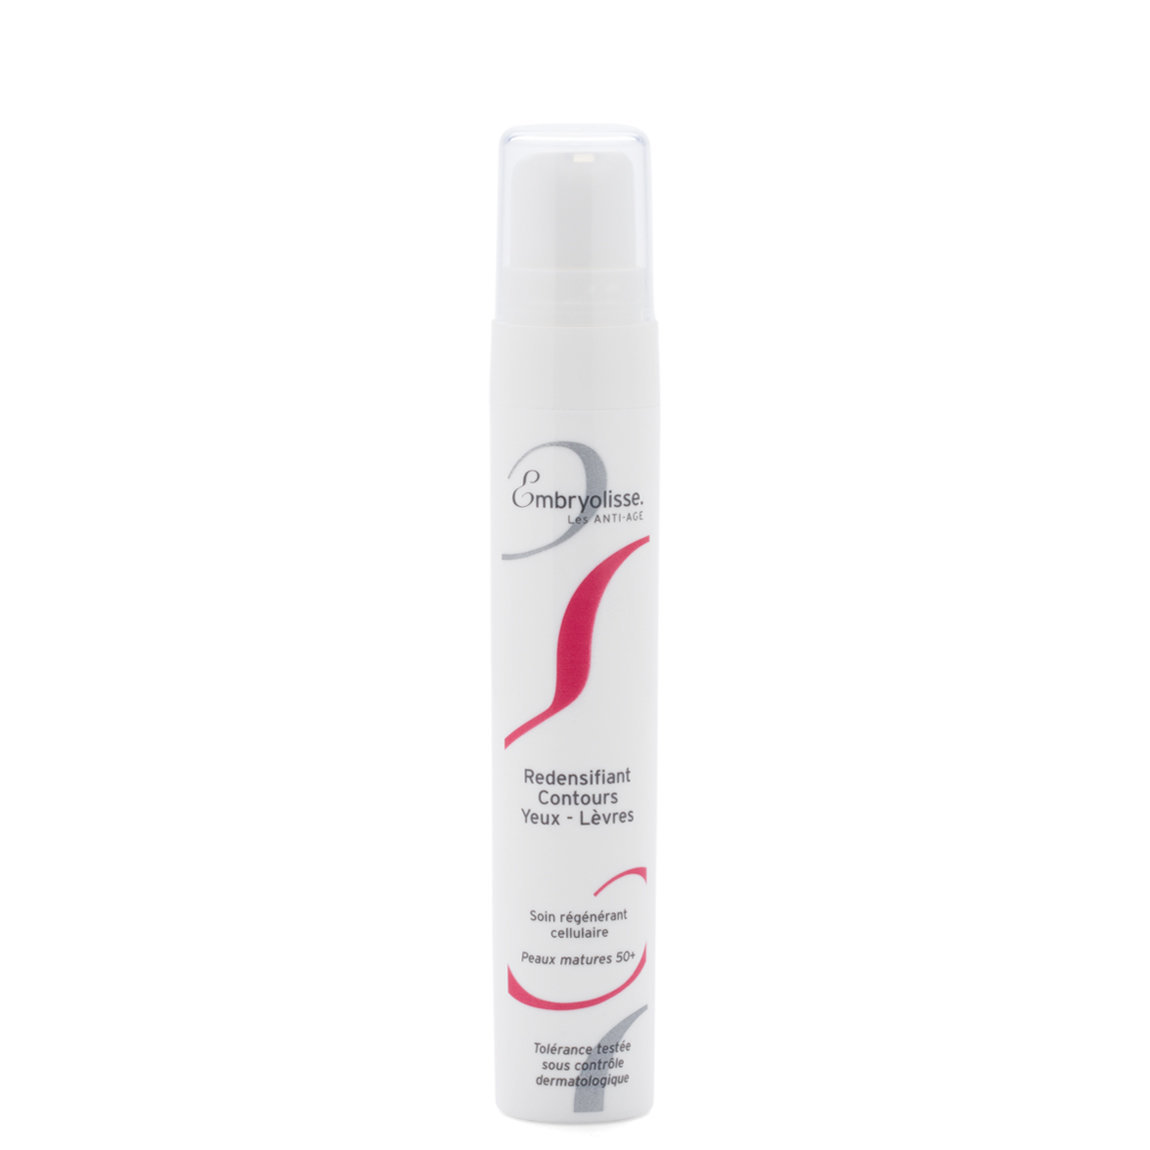 Embryolisse Re-Densifying Eye and Lip Contour Cream alternative view 1.